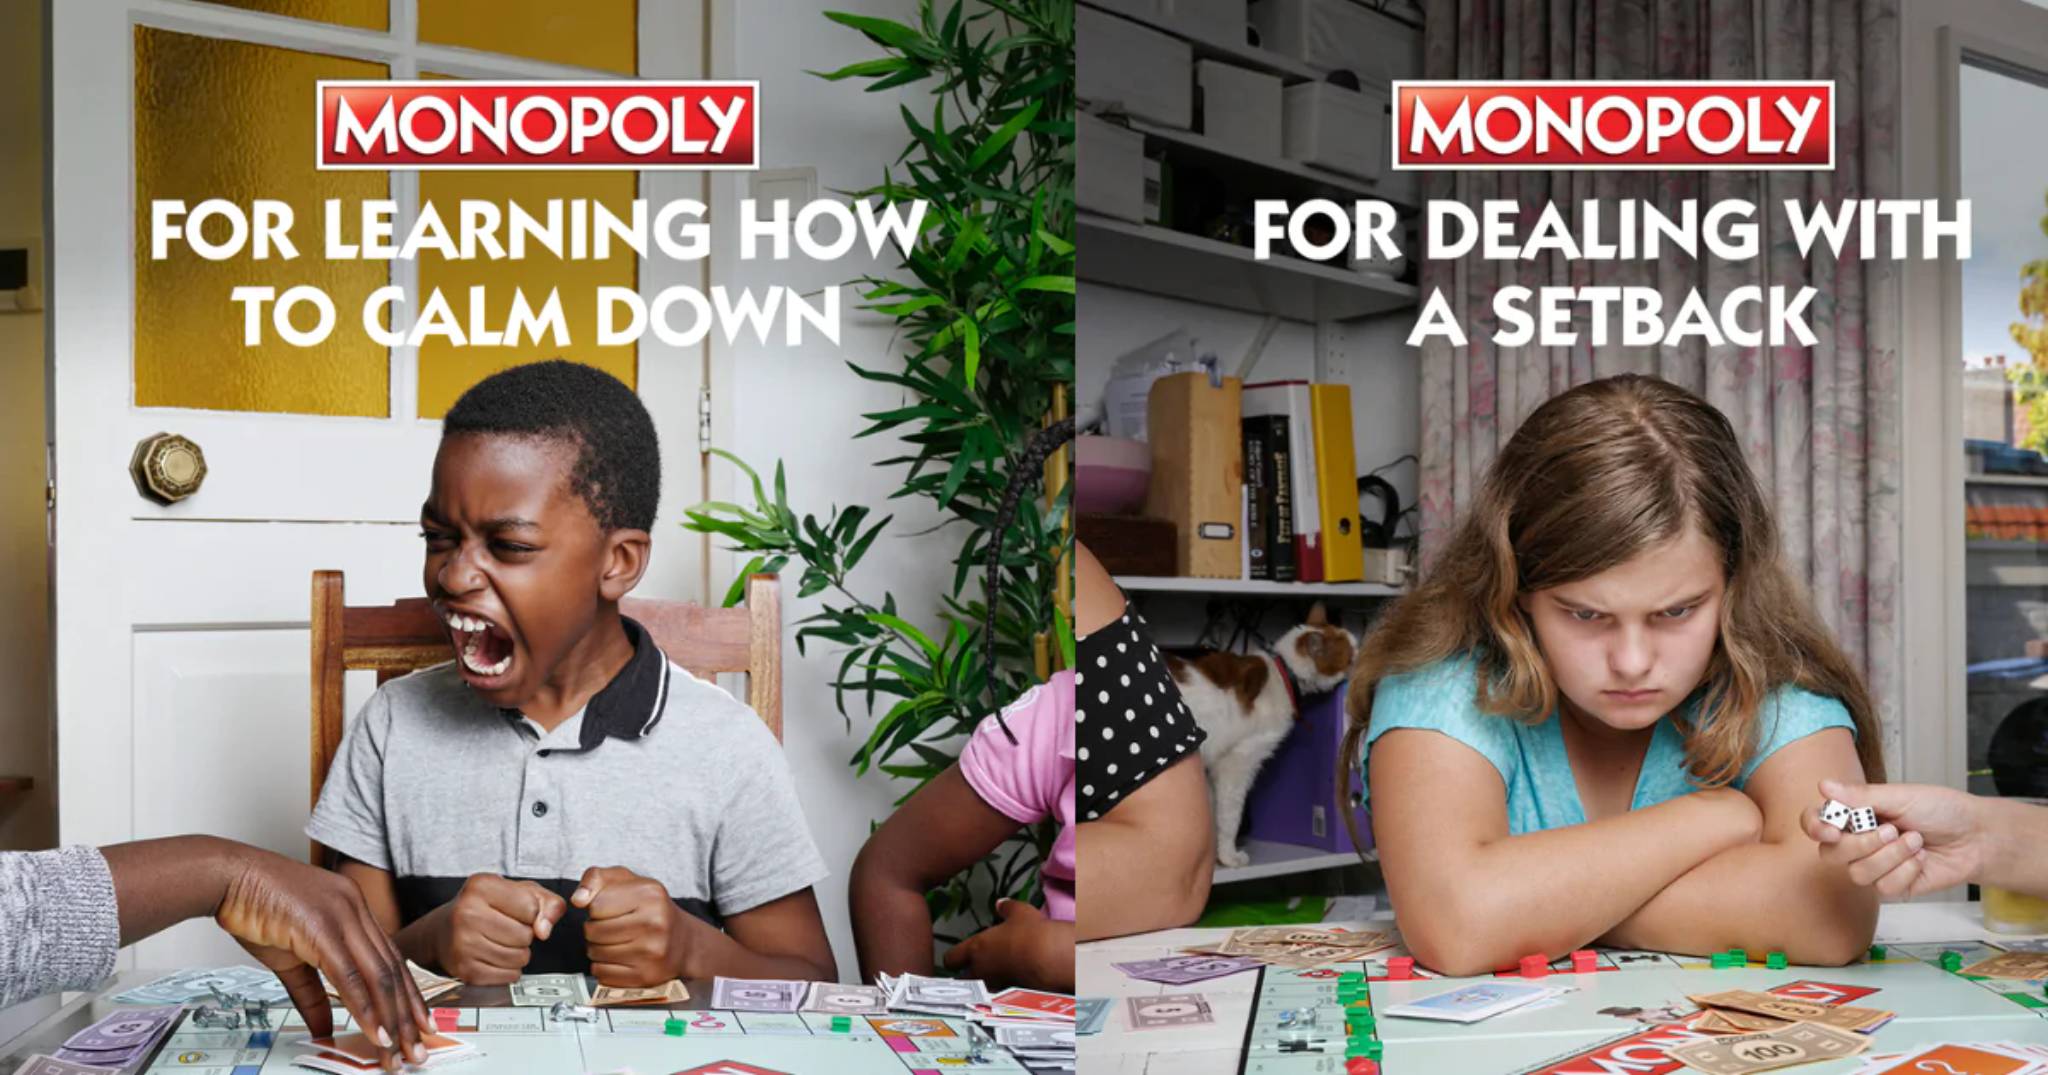 Monopoly campaign reframes family feuds  